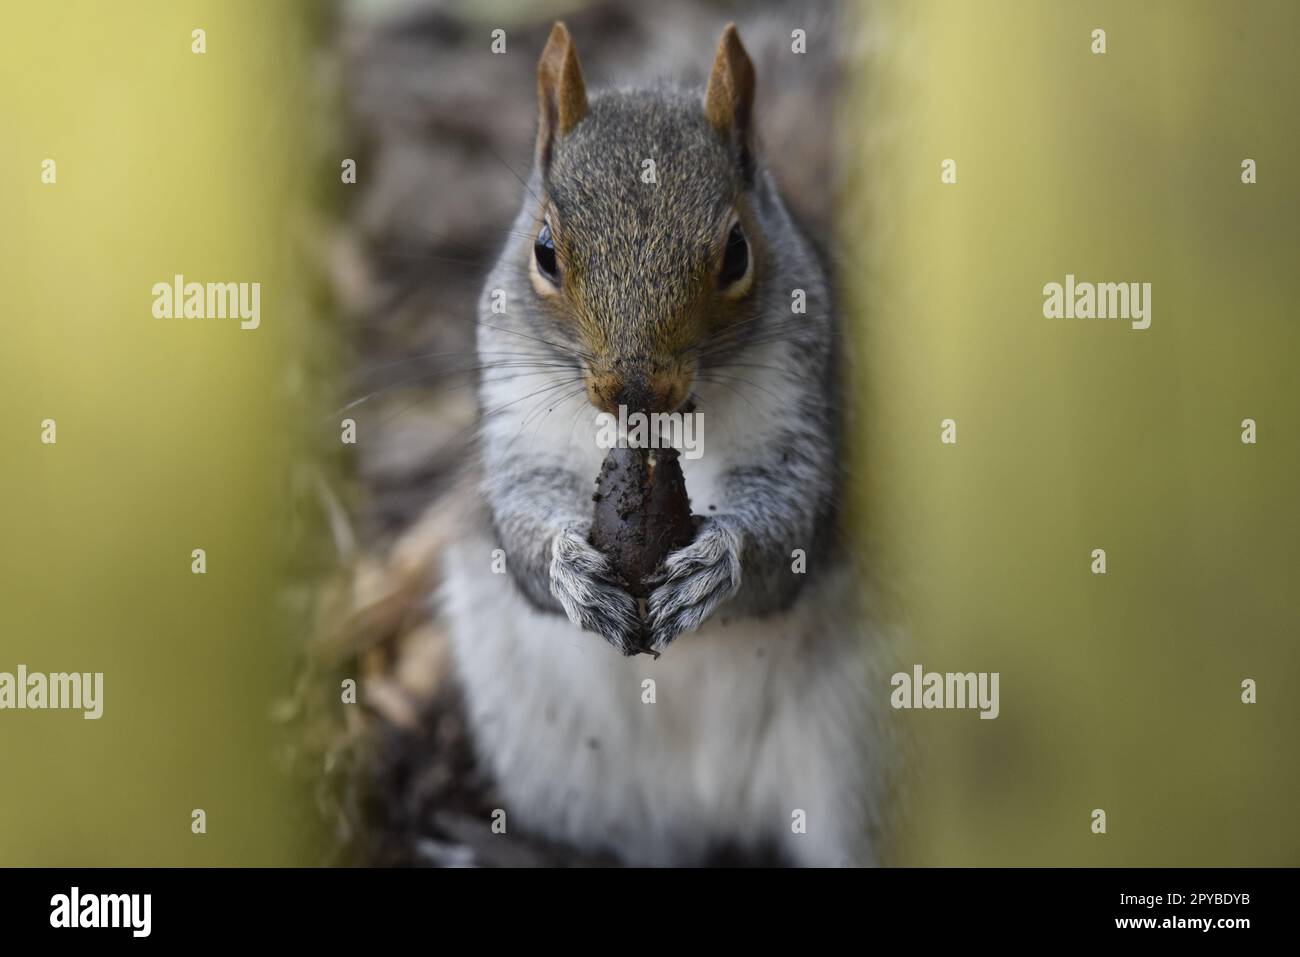 Close-Up Image of a Grey Squirrel (Sciurus carolinensis)  Facing Camera with Ears Back, While Holding a Recently Dug-Up Acorn in Its Paws, UK Stock Photo